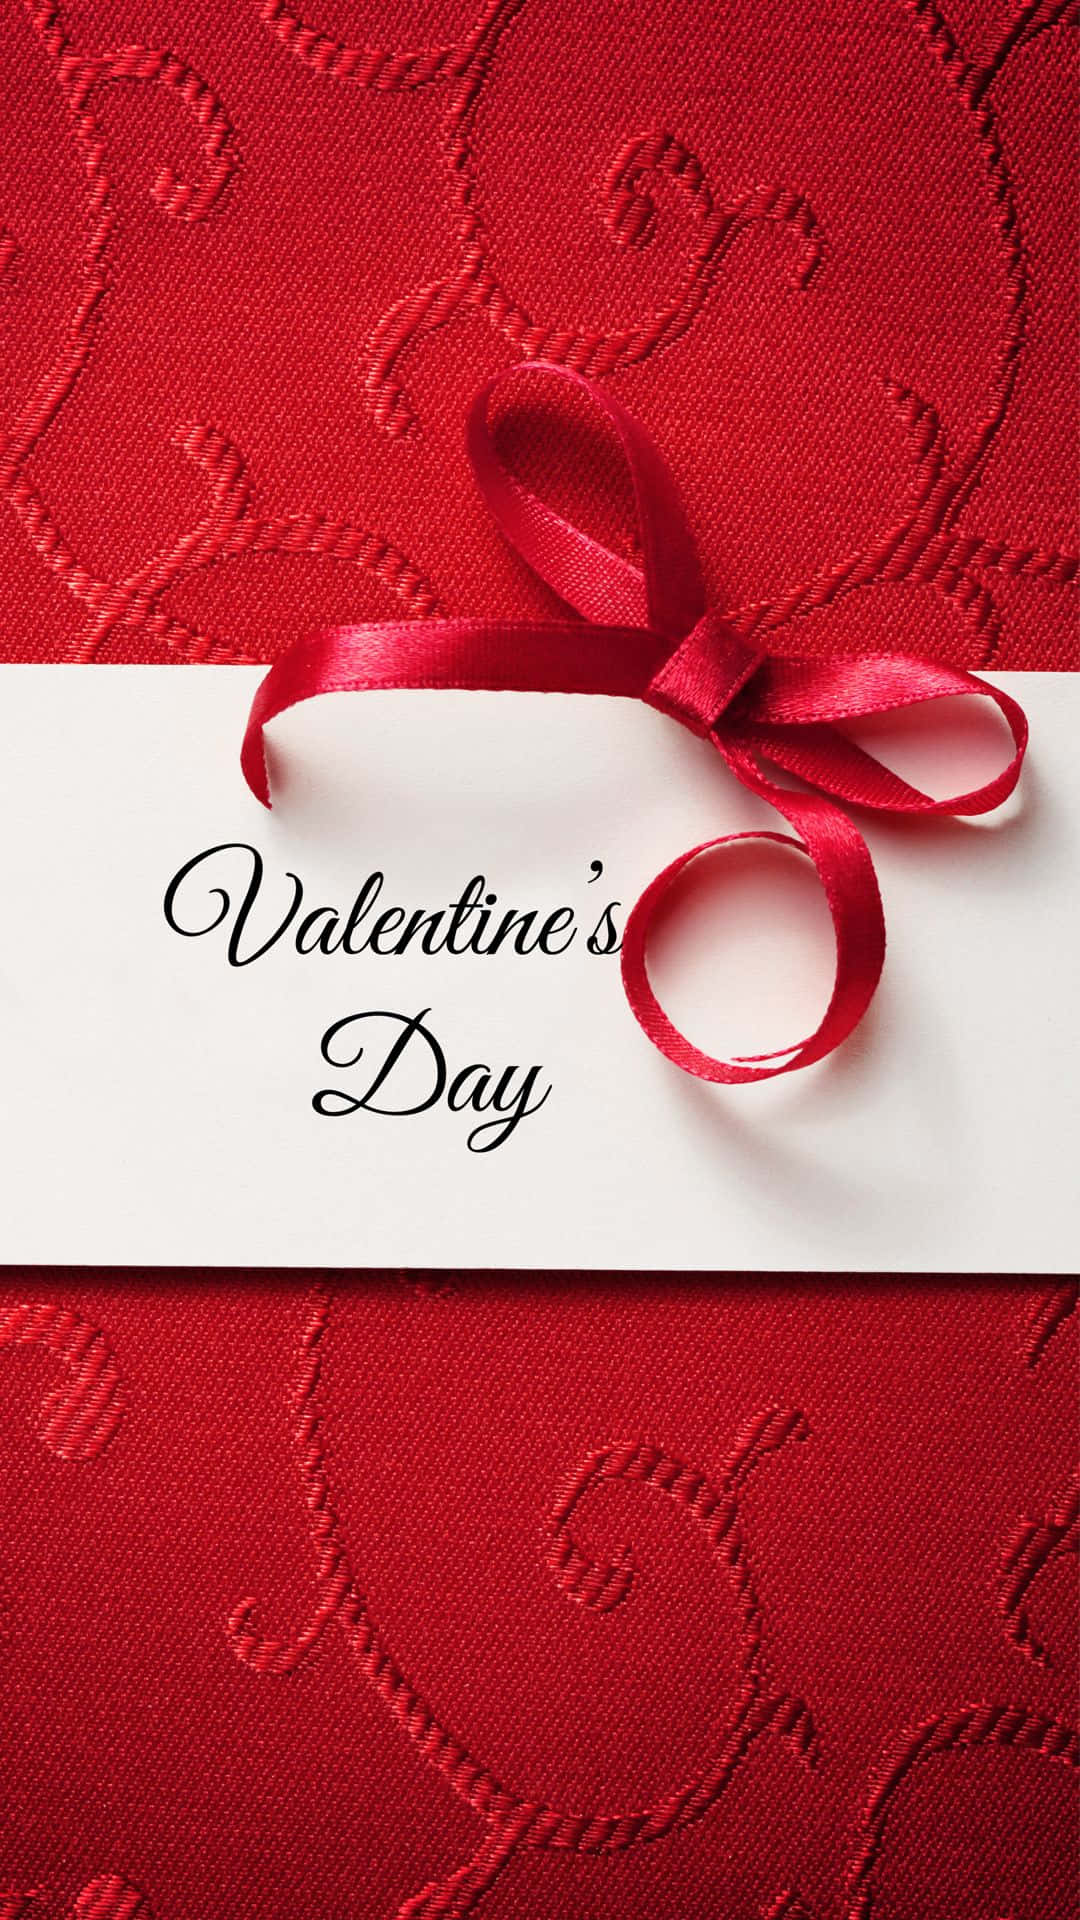 Valentine's Day Card With Red Ribbon